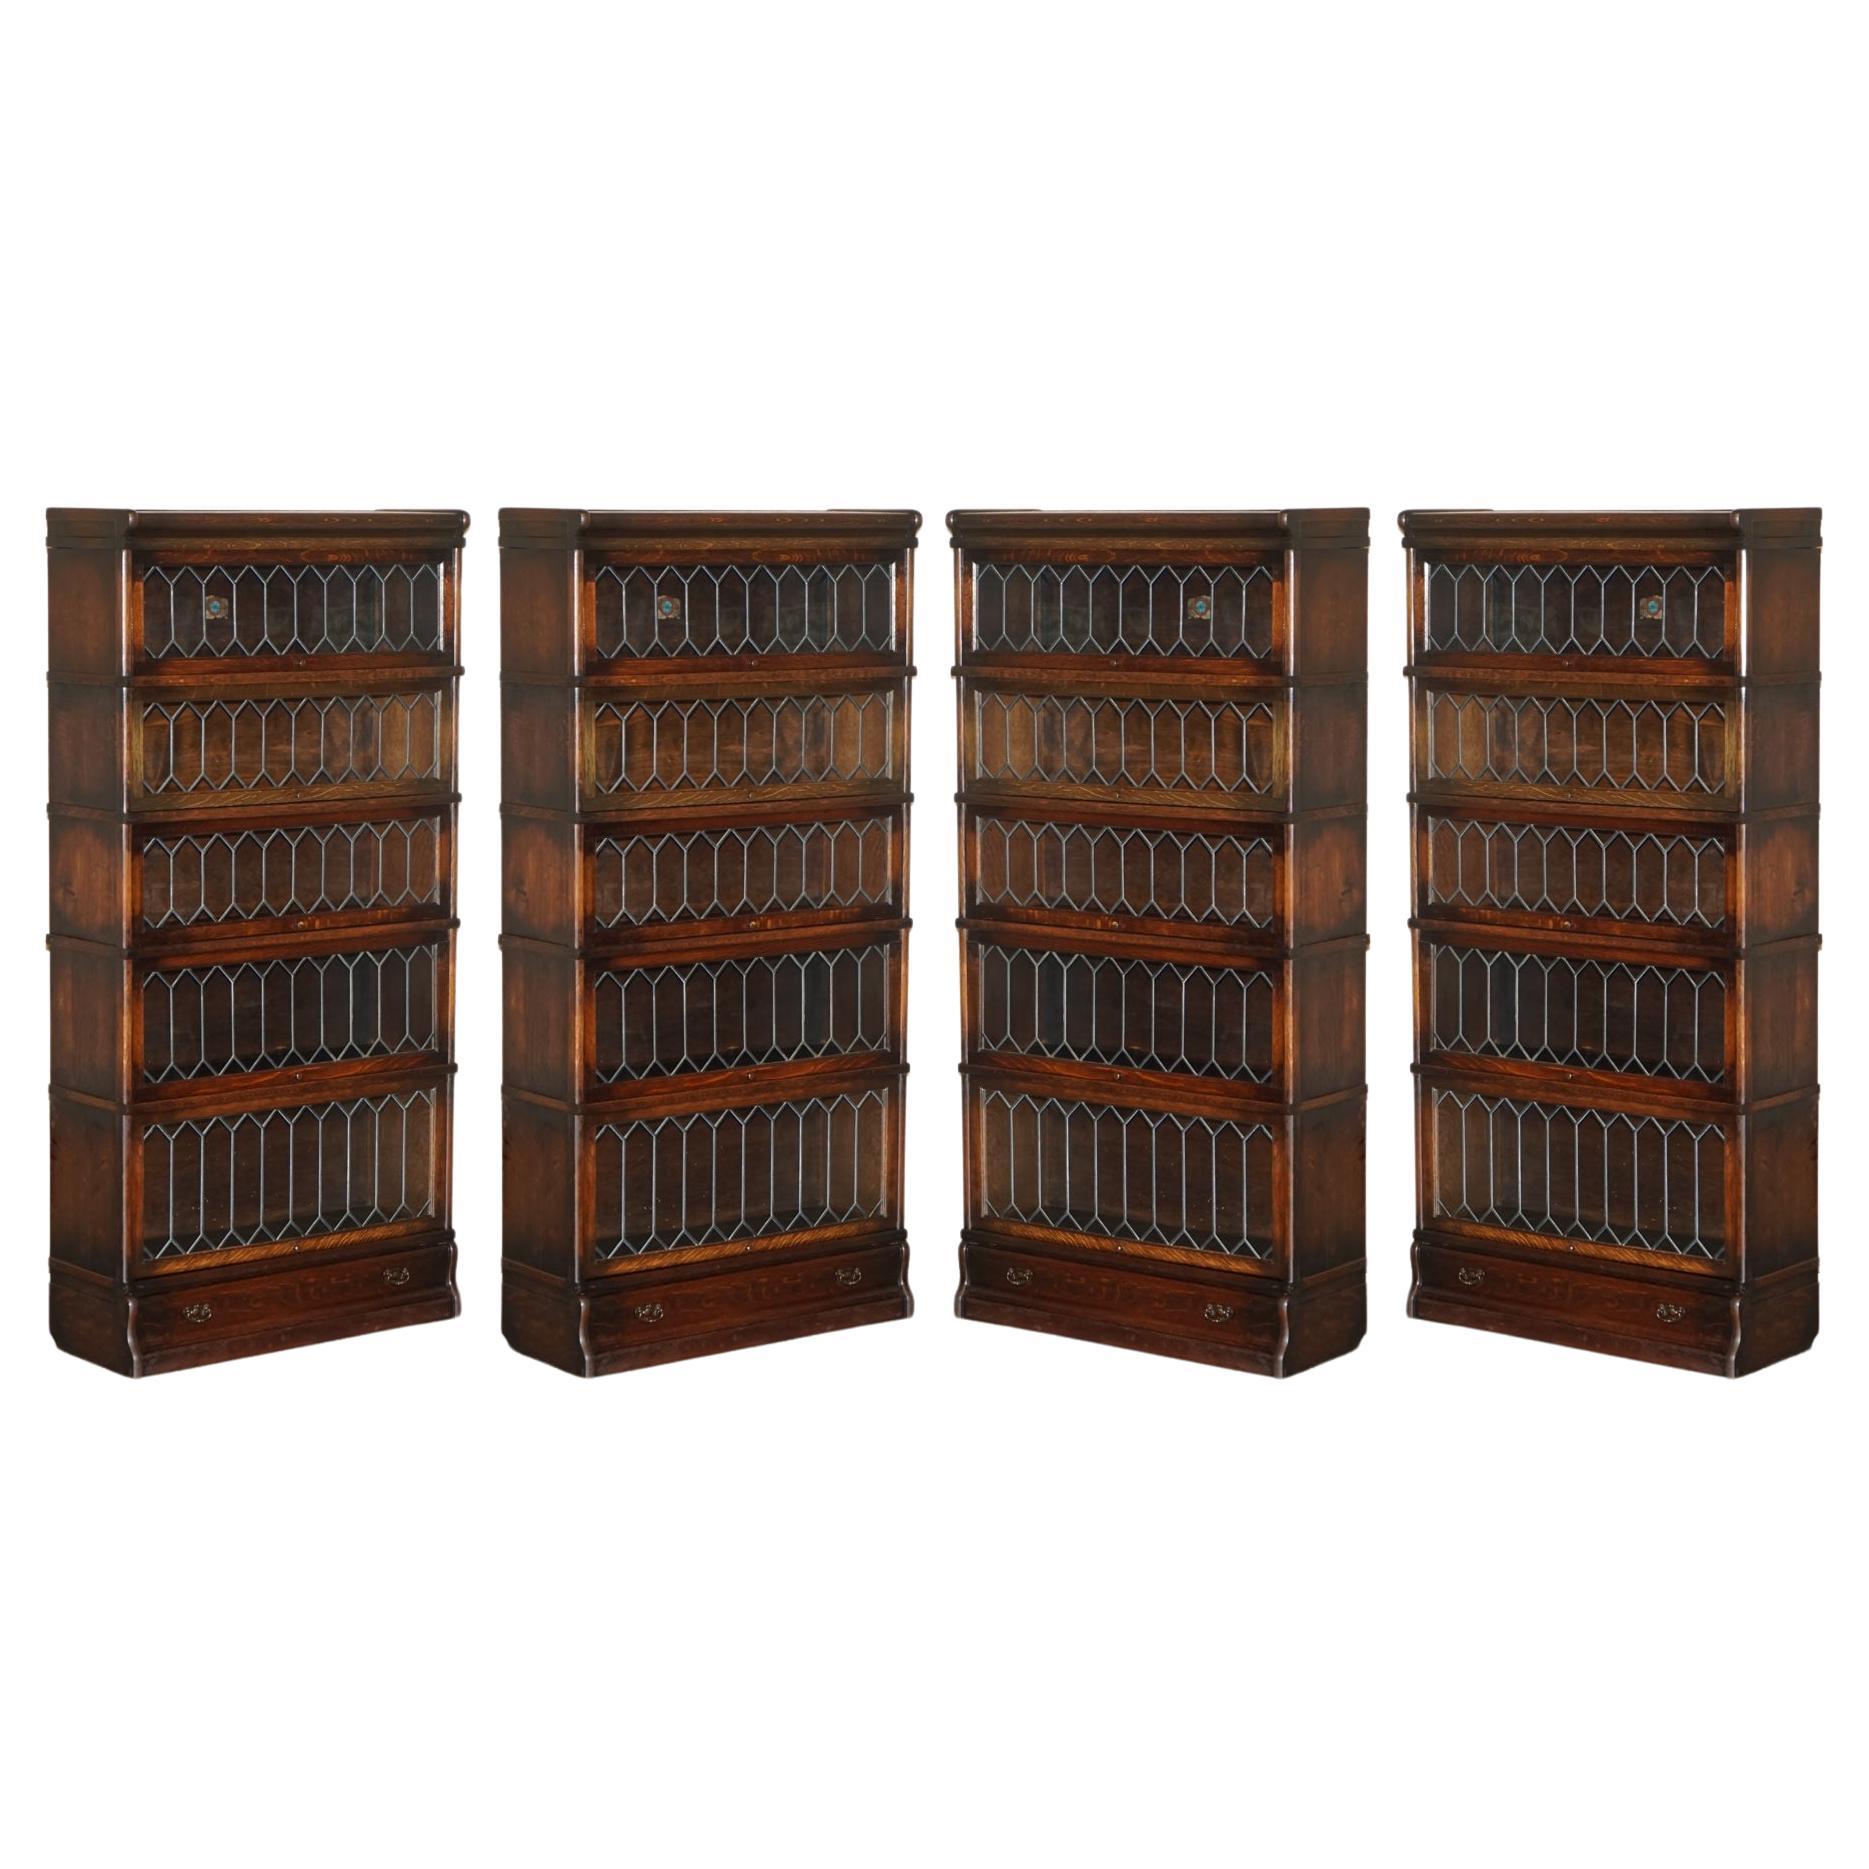 Suite of Four Original Globe Wernicke Solicitors Stacking Bookcases Drawer Bases